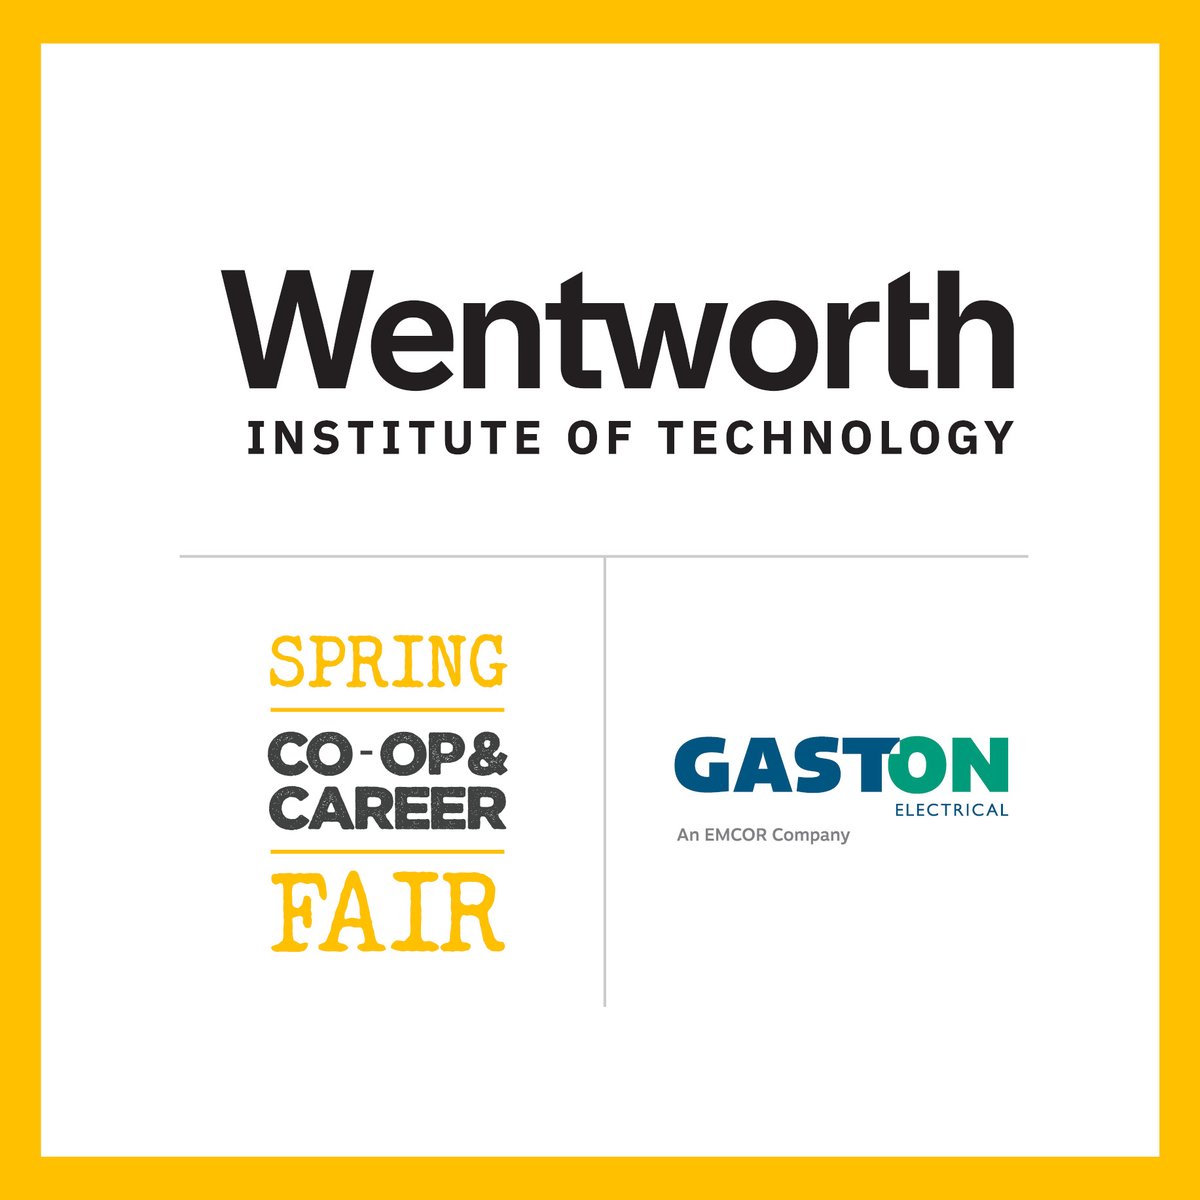 Excited to attend the @wentworthinst Spring Co-op & Career Fair on Tuesday from 1:30 to 5:30 PM in Tansey Gym. If you are attending, please stop over and meet Nina and Karen from the Gaston Team! #WITPride @witathletics @swe_wit @CLPWentworth #UniversityofOpportunity